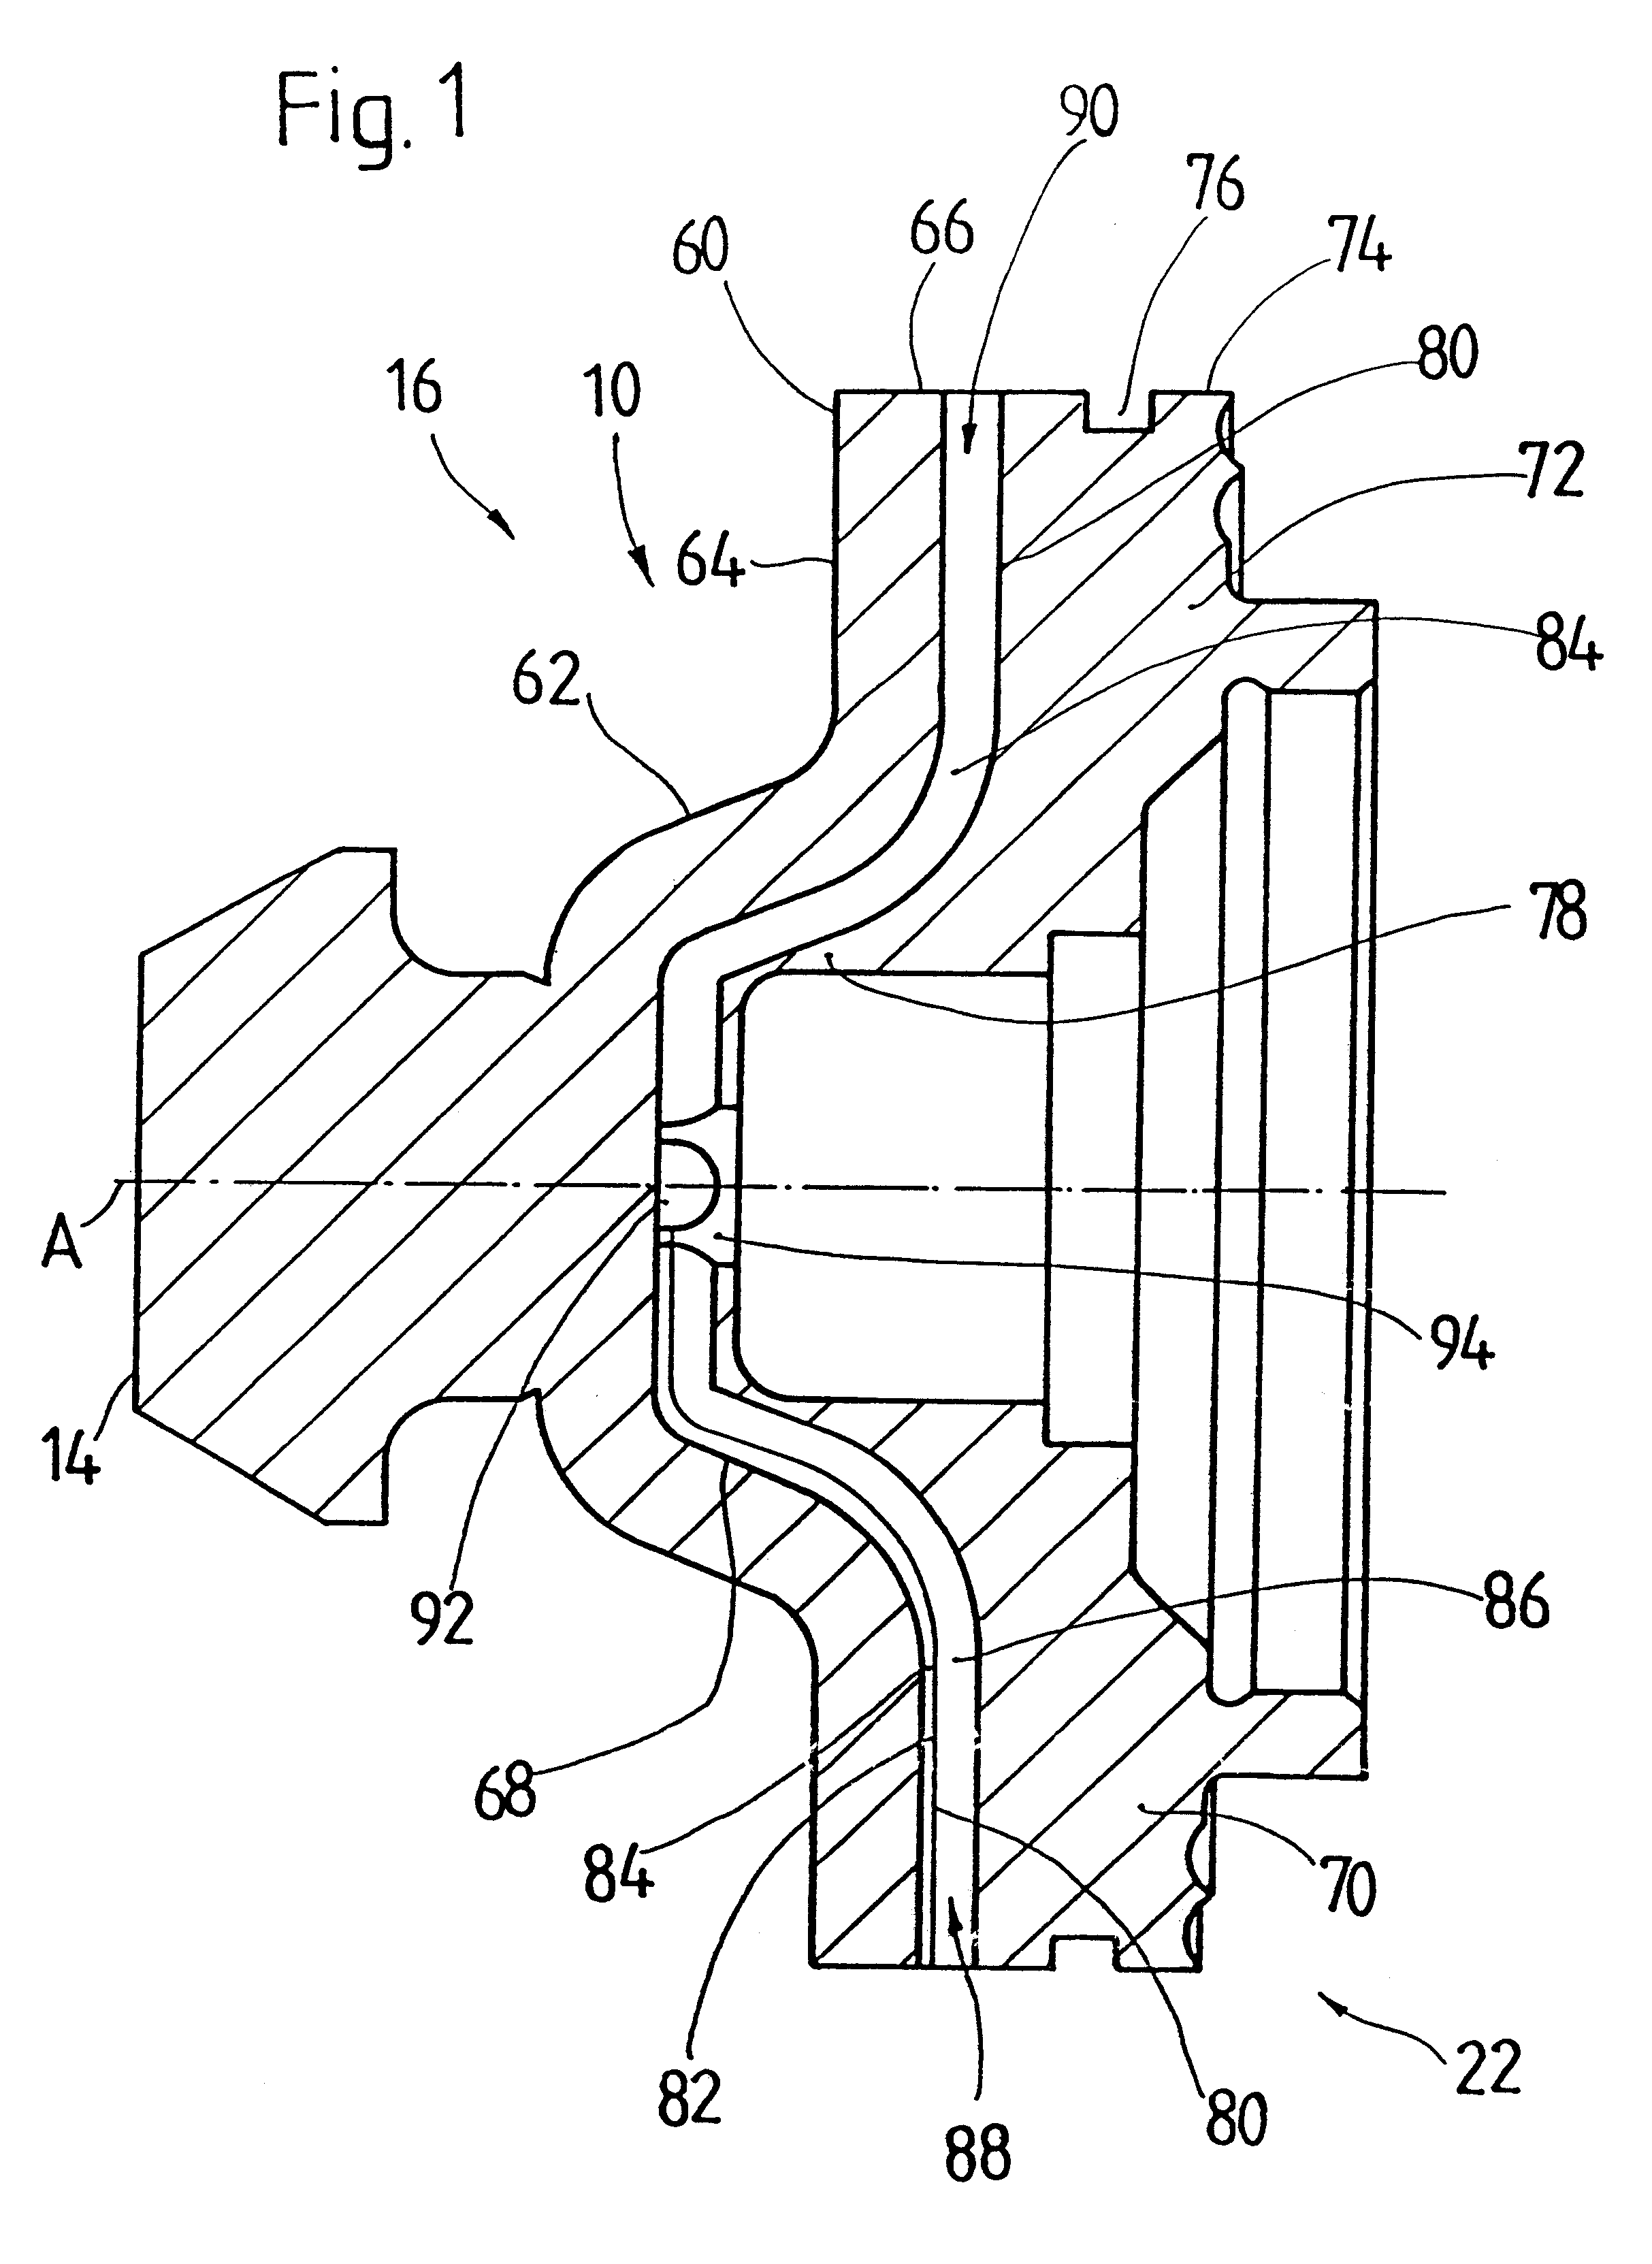 Hub arrangement for a hydrodynamic torque converter and method for producing same